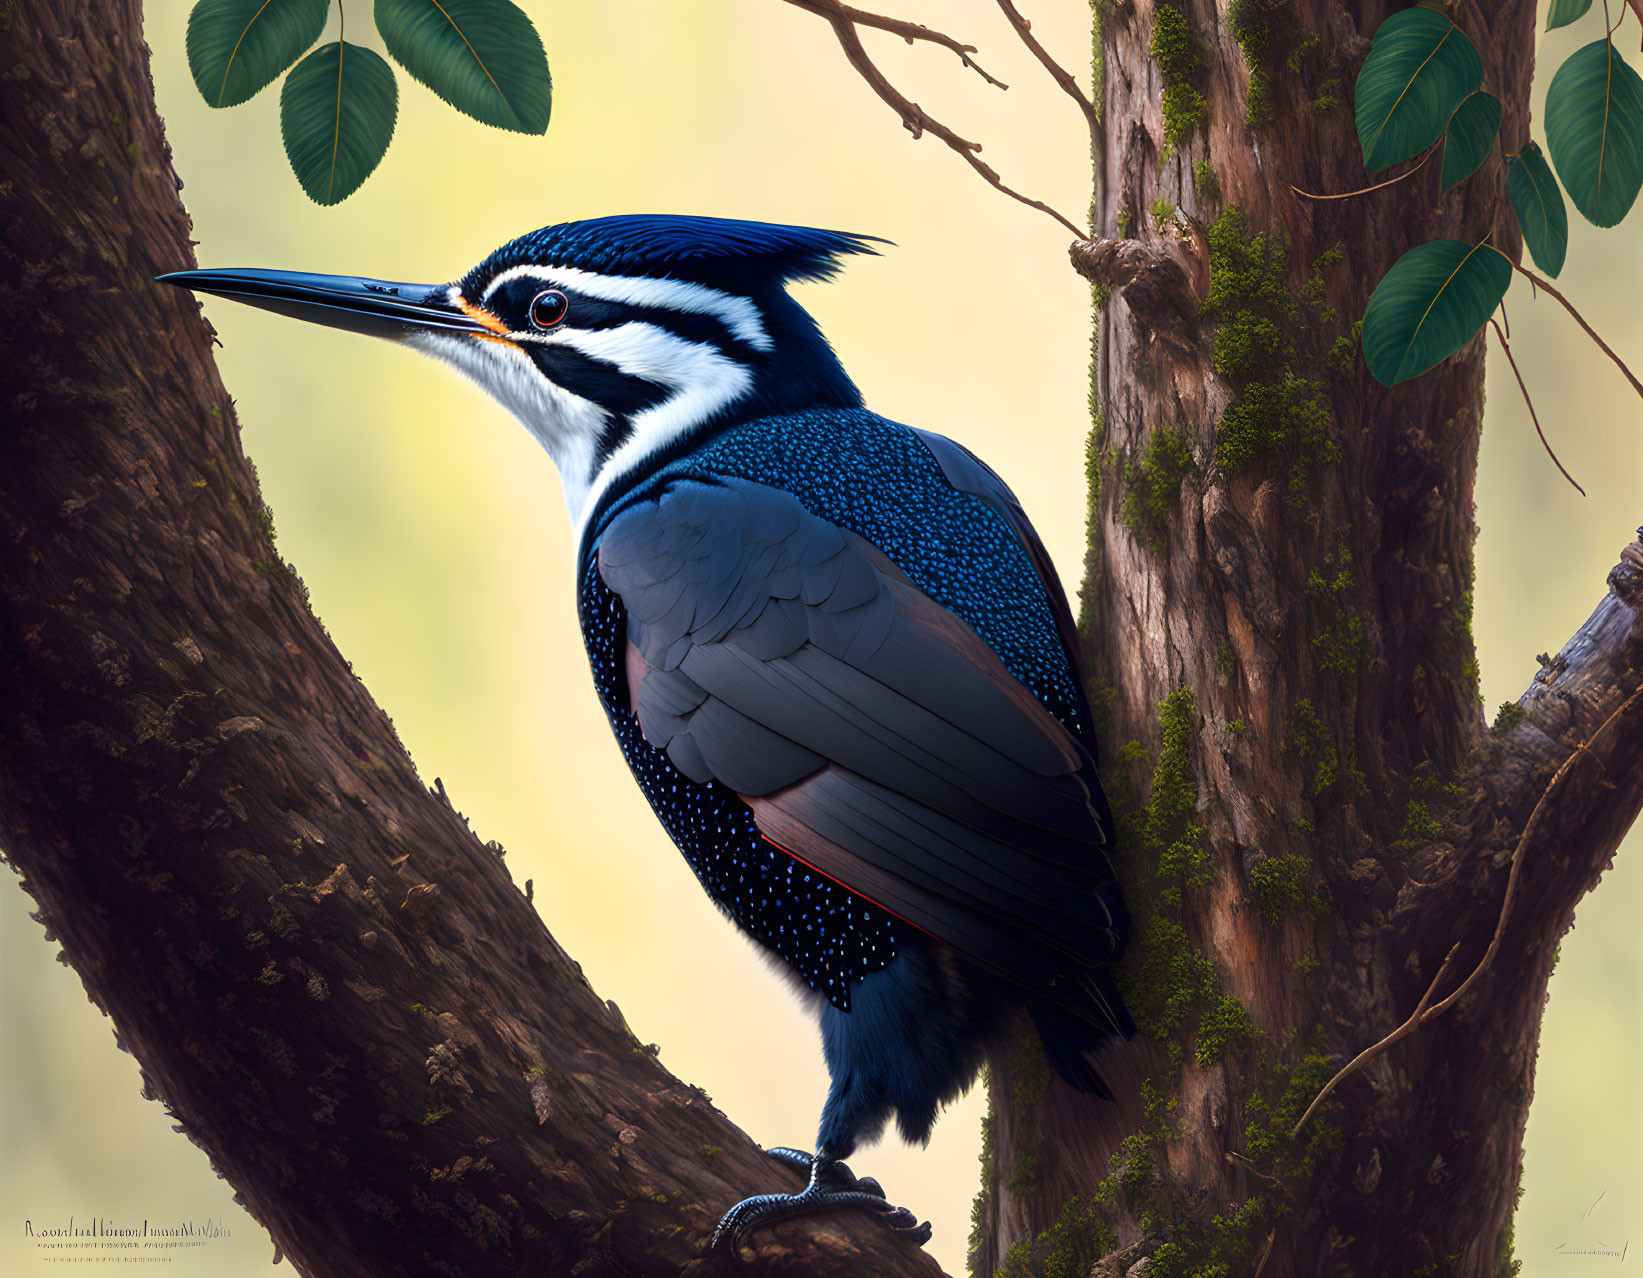 Vibrant blue kingfisher with long beak perched on tree trunk